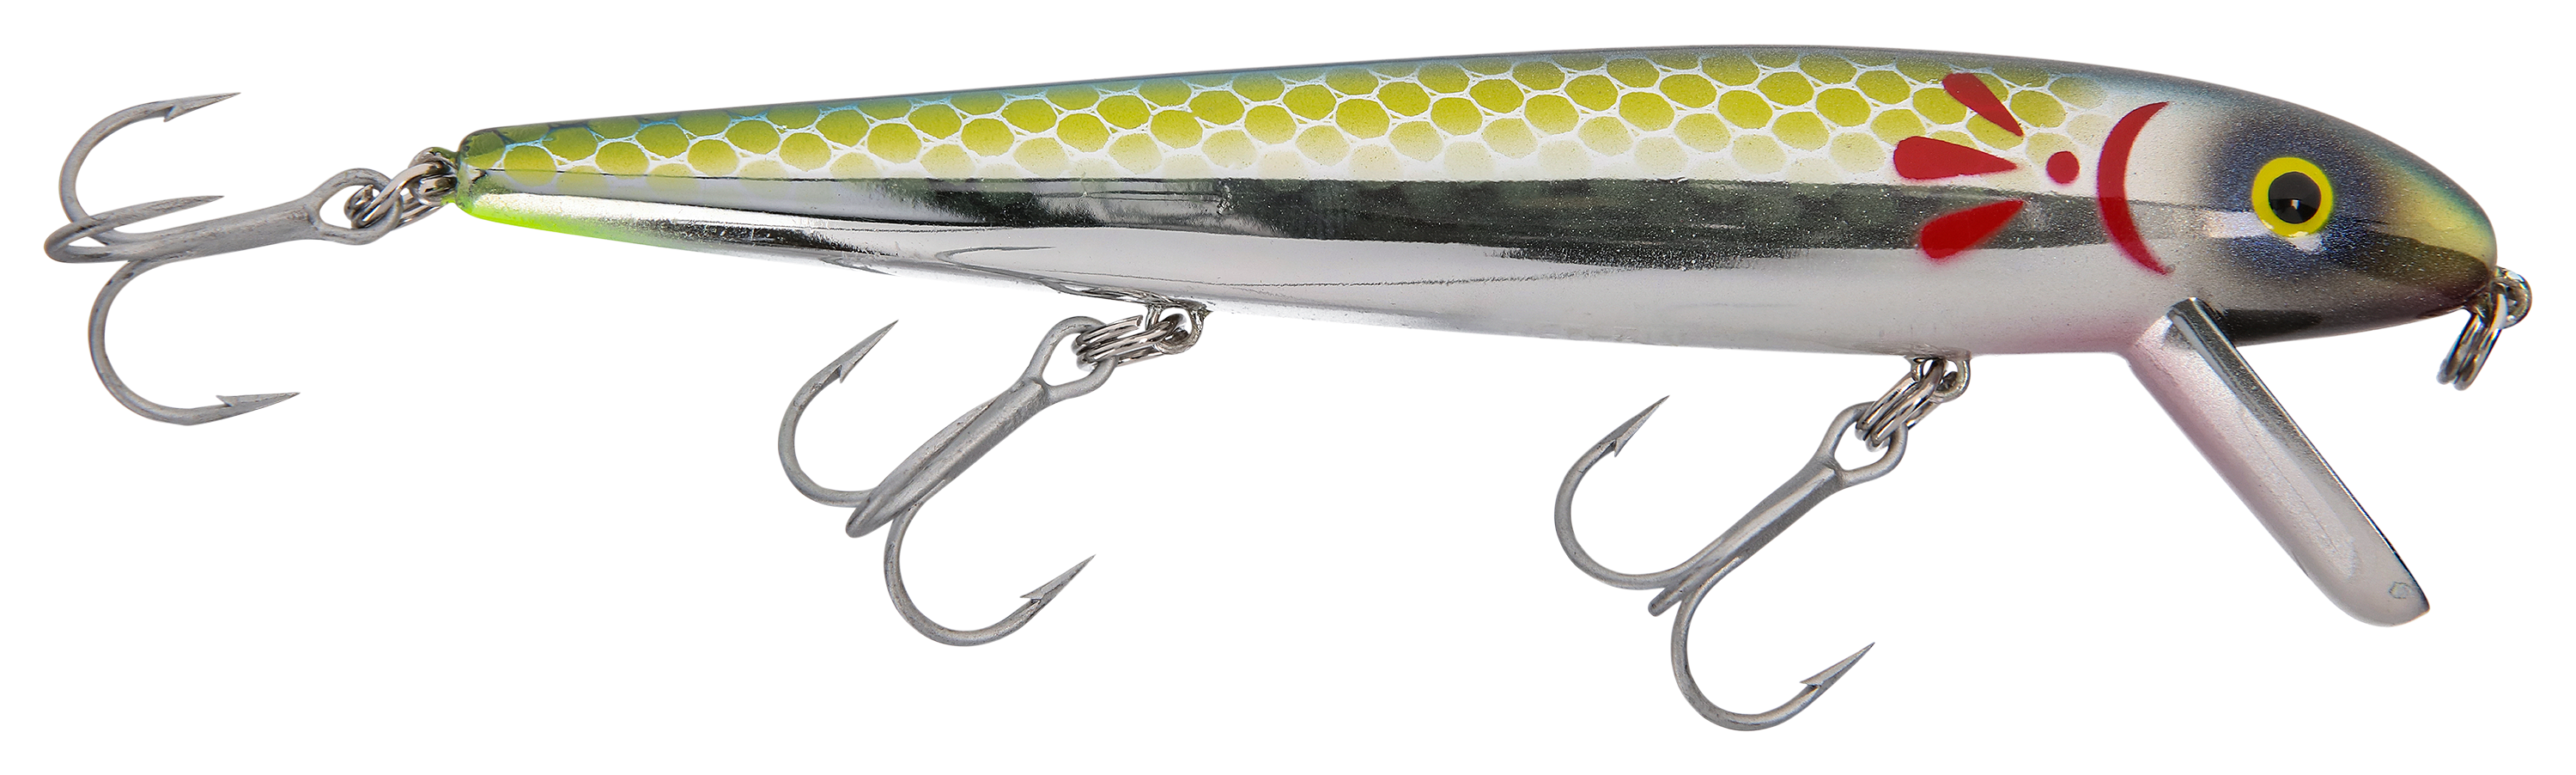 Cotton Cordell Wally Stinger pink lemonade/Red Fin 2 lures $12.00